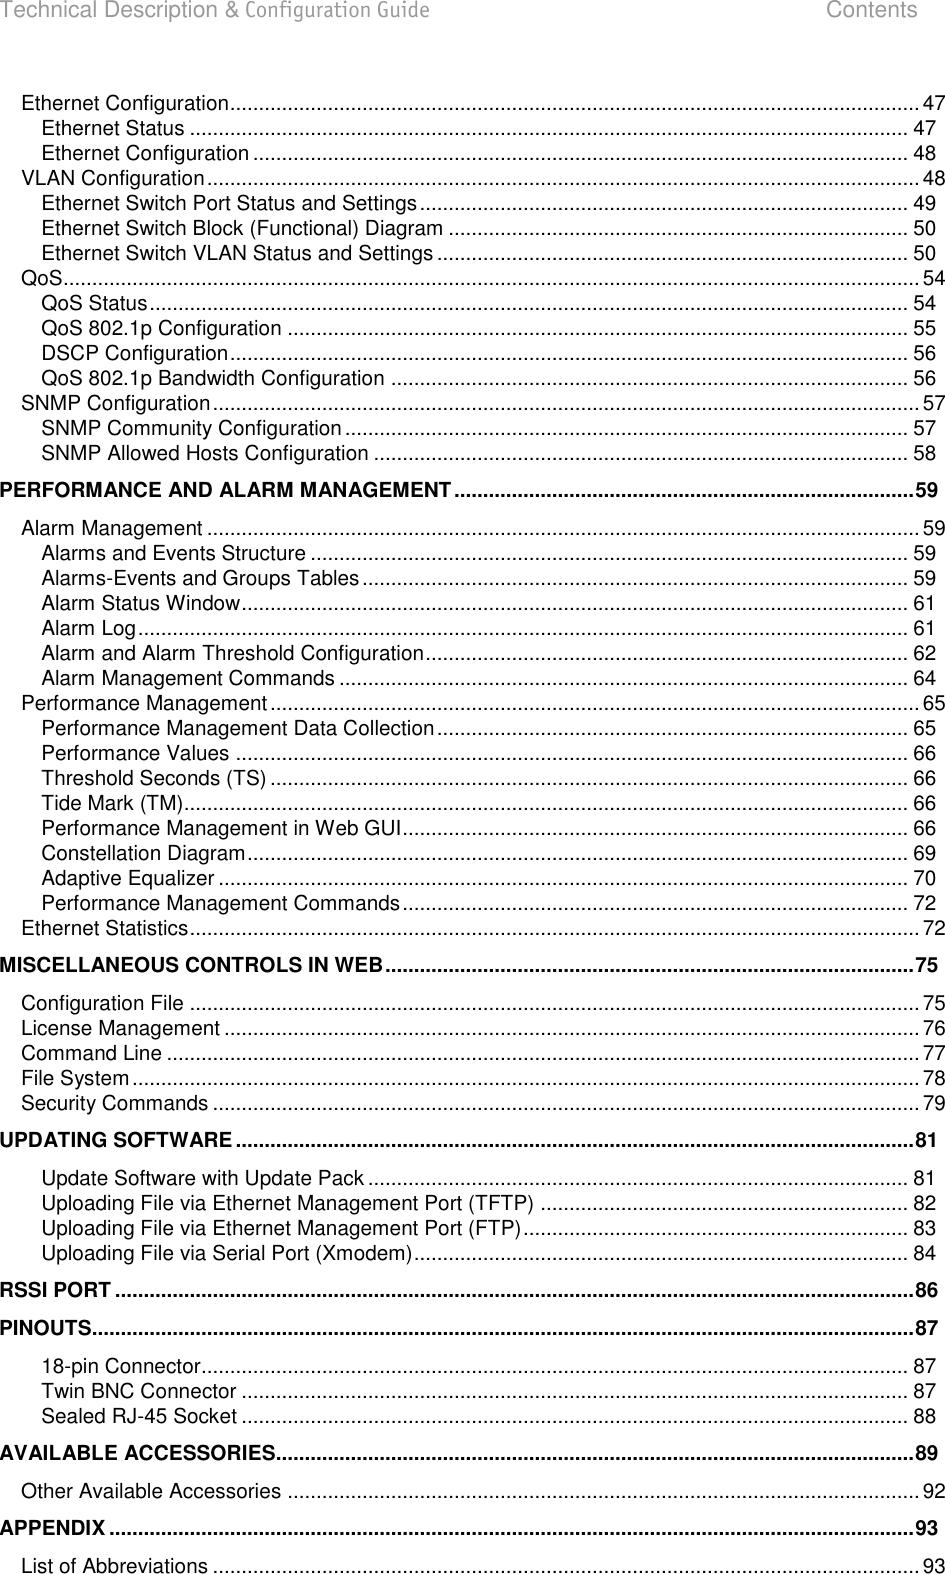 Technical Description &amp; Configuration Guide  Contents  LigoWave  Page 4 Ethernet Configuration ........................................................................................................................ 47 Ethernet Status ............................................................................................................................. 47 Ethernet Configuration .................................................................................................................. 48 VLAN Configuration ............................................................................................................................ 48 Ethernet Switch Port Status and Settings ..................................................................................... 49 Ethernet Switch Block (Functional) Diagram ................................................................................ 50 Ethernet Switch VLAN Status and Settings .................................................................................. 50 QoS ..................................................................................................................................................... 54 QoS Status .................................................................................................................................... 54 QoS 802.1p Configuration ............................................................................................................ 55 DSCP Configuration ...................................................................................................................... 56 QoS 802.1p Bandwidth Configuration .......................................................................................... 56 SNMP Configuration ........................................................................................................................... 57 SNMP Community Configuration .................................................................................................. 57 SNMP Allowed Hosts Configuration ............................................................................................. 58 PERFORMANCE AND ALARM MANAGEMENT ................................................................................ 59 Alarm Management ............................................................................................................................ 59 Alarms and Events Structure ........................................................................................................ 59 Alarms-Events and Groups Tables ............................................................................................... 59 Alarm Status Window .................................................................................................................... 61 Alarm Log ...................................................................................................................................... 61 Alarm and Alarm Threshold Configuration .................................................................................... 62 Alarm Management Commands ................................................................................................... 64 Performance Management ................................................................................................................. 65 Performance Management Data Collection .................................................................................. 65 Performance Values ..................................................................................................................... 66 Threshold Seconds (TS) ............................................................................................................... 66 Tide Mark (TM) .............................................................................................................................. 66 Performance Management in Web GUI ........................................................................................ 66 Constellation Diagram ................................................................................................................... 69 Adaptive Equalizer ........................................................................................................................ 70 Performance Management Commands ........................................................................................ 72 Ethernet Statistics ............................................................................................................................... 72 MISCELLANEOUS CONTROLS IN WEB ............................................................................................ 75 Configuration File ............................................................................................................................... 75 License Management ......................................................................................................................... 76 Command Line ................................................................................................................................... 77 File System ......................................................................................................................................... 78 Security Commands ........................................................................................................................... 79 UPDATING SOFTWARE ...................................................................................................................... 81 Update Software with Update Pack .............................................................................................. 81 Uploading File via Ethernet Management Port (TFTP) ................................................................ 82 Uploading File via Ethernet Management Port (FTP) ................................................................... 83 Uploading File via Serial Port (Xmodem) ...................................................................................... 84 RSSI PORT ........................................................................................................................................... 86 PINOUTS ............................................................................................................................................... 87 18-pin Connector........................................................................................................................... 87 Twin BNC Connector .................................................................................................................... 87 Sealed RJ-45 Socket .................................................................................................................... 88 AVAILABLE ACCESSORIES............................................................................................................... 89 Other Available Accessories .............................................................................................................. 92 APPENDIX ............................................................................................................................................ 93 List of Abbreviations ........................................................................................................................... 93    